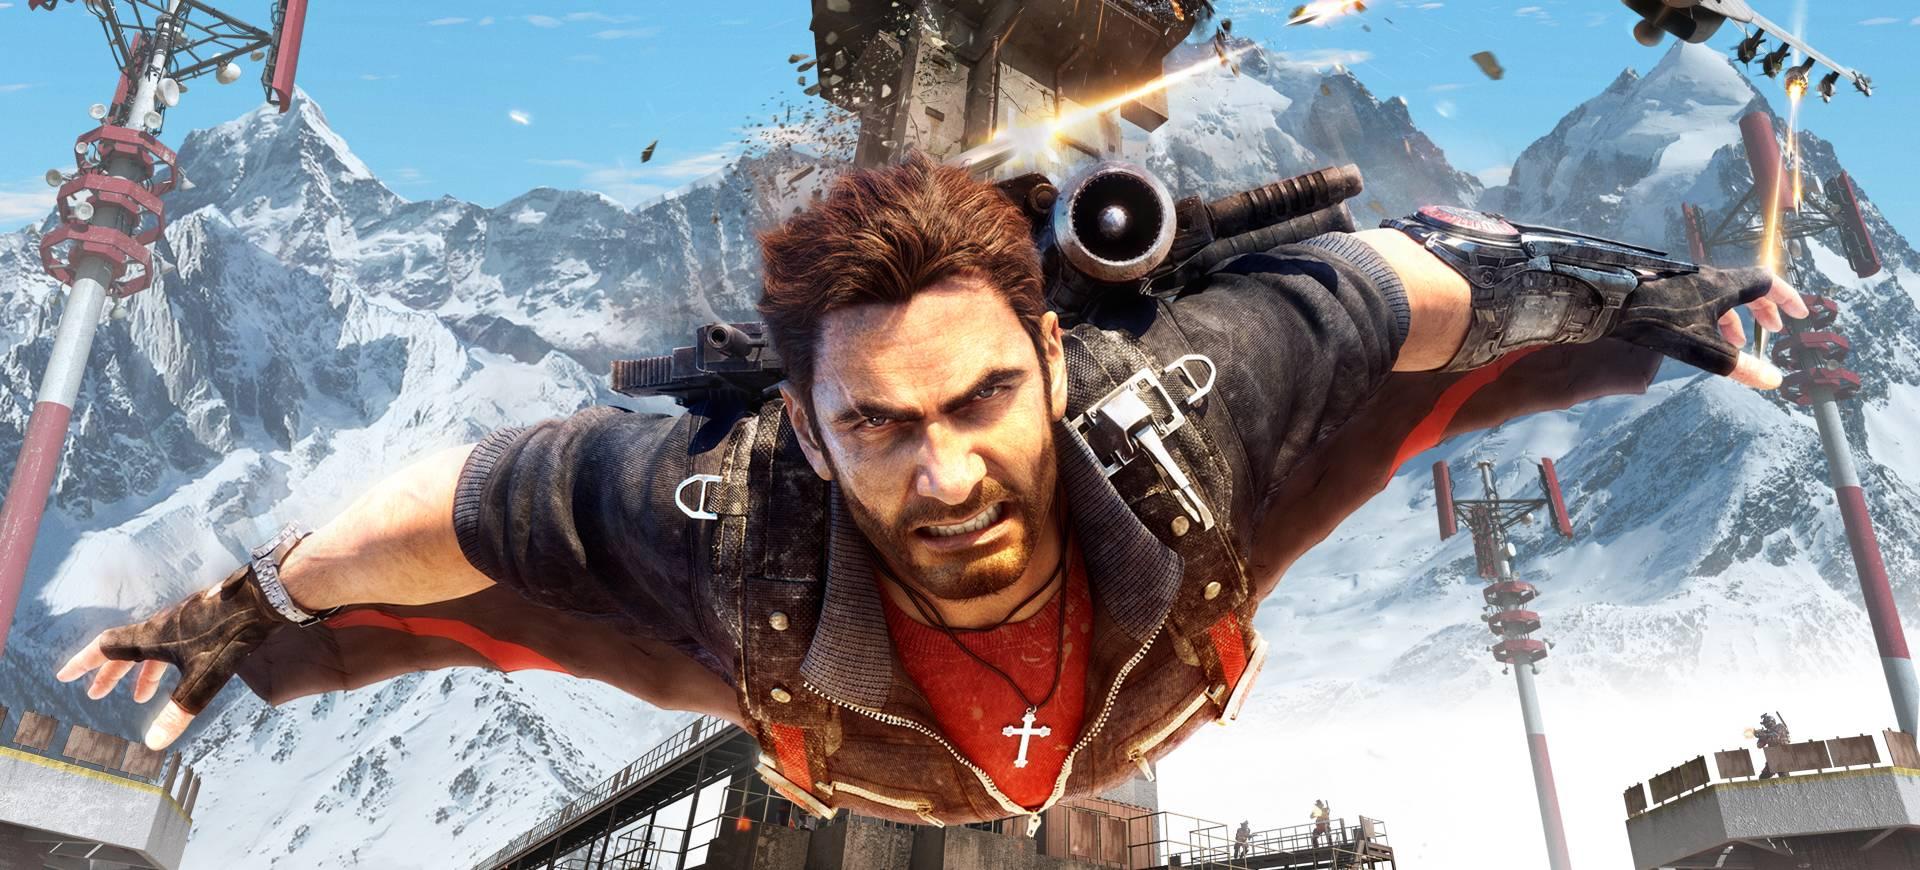 Tựa game Just Cause 3